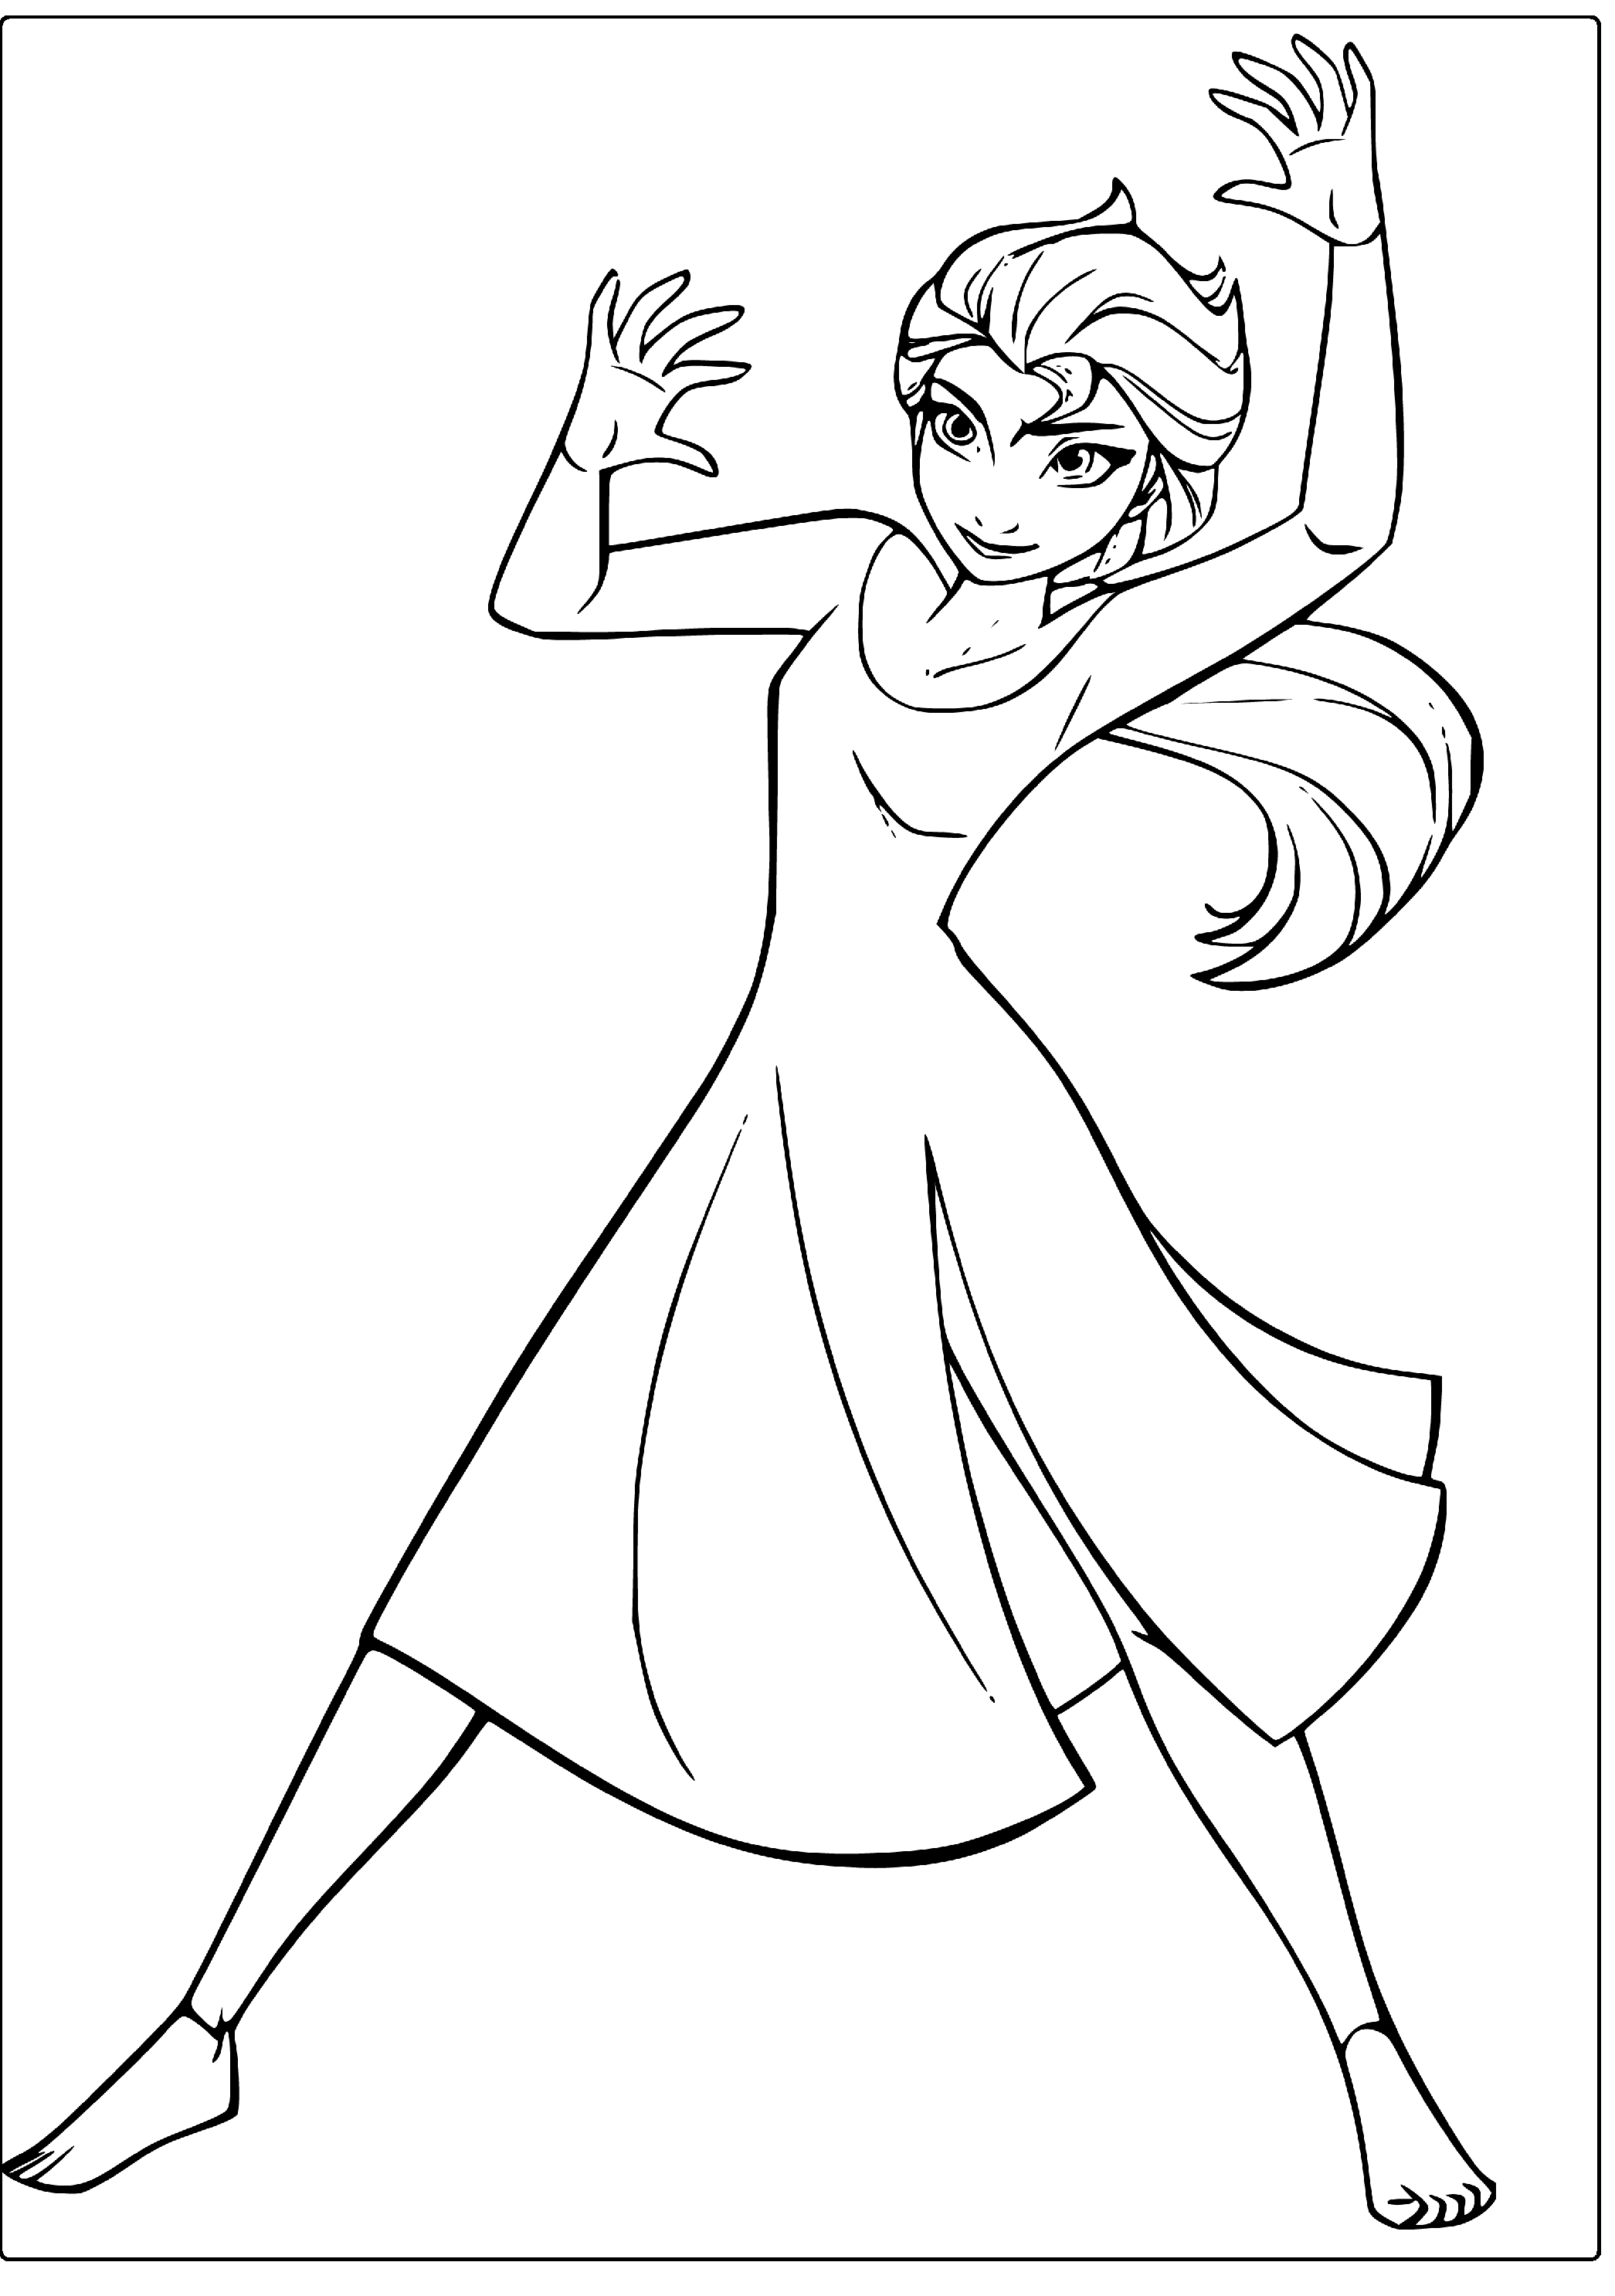 Printable Frozen afraid of something Coloring Page for kids.